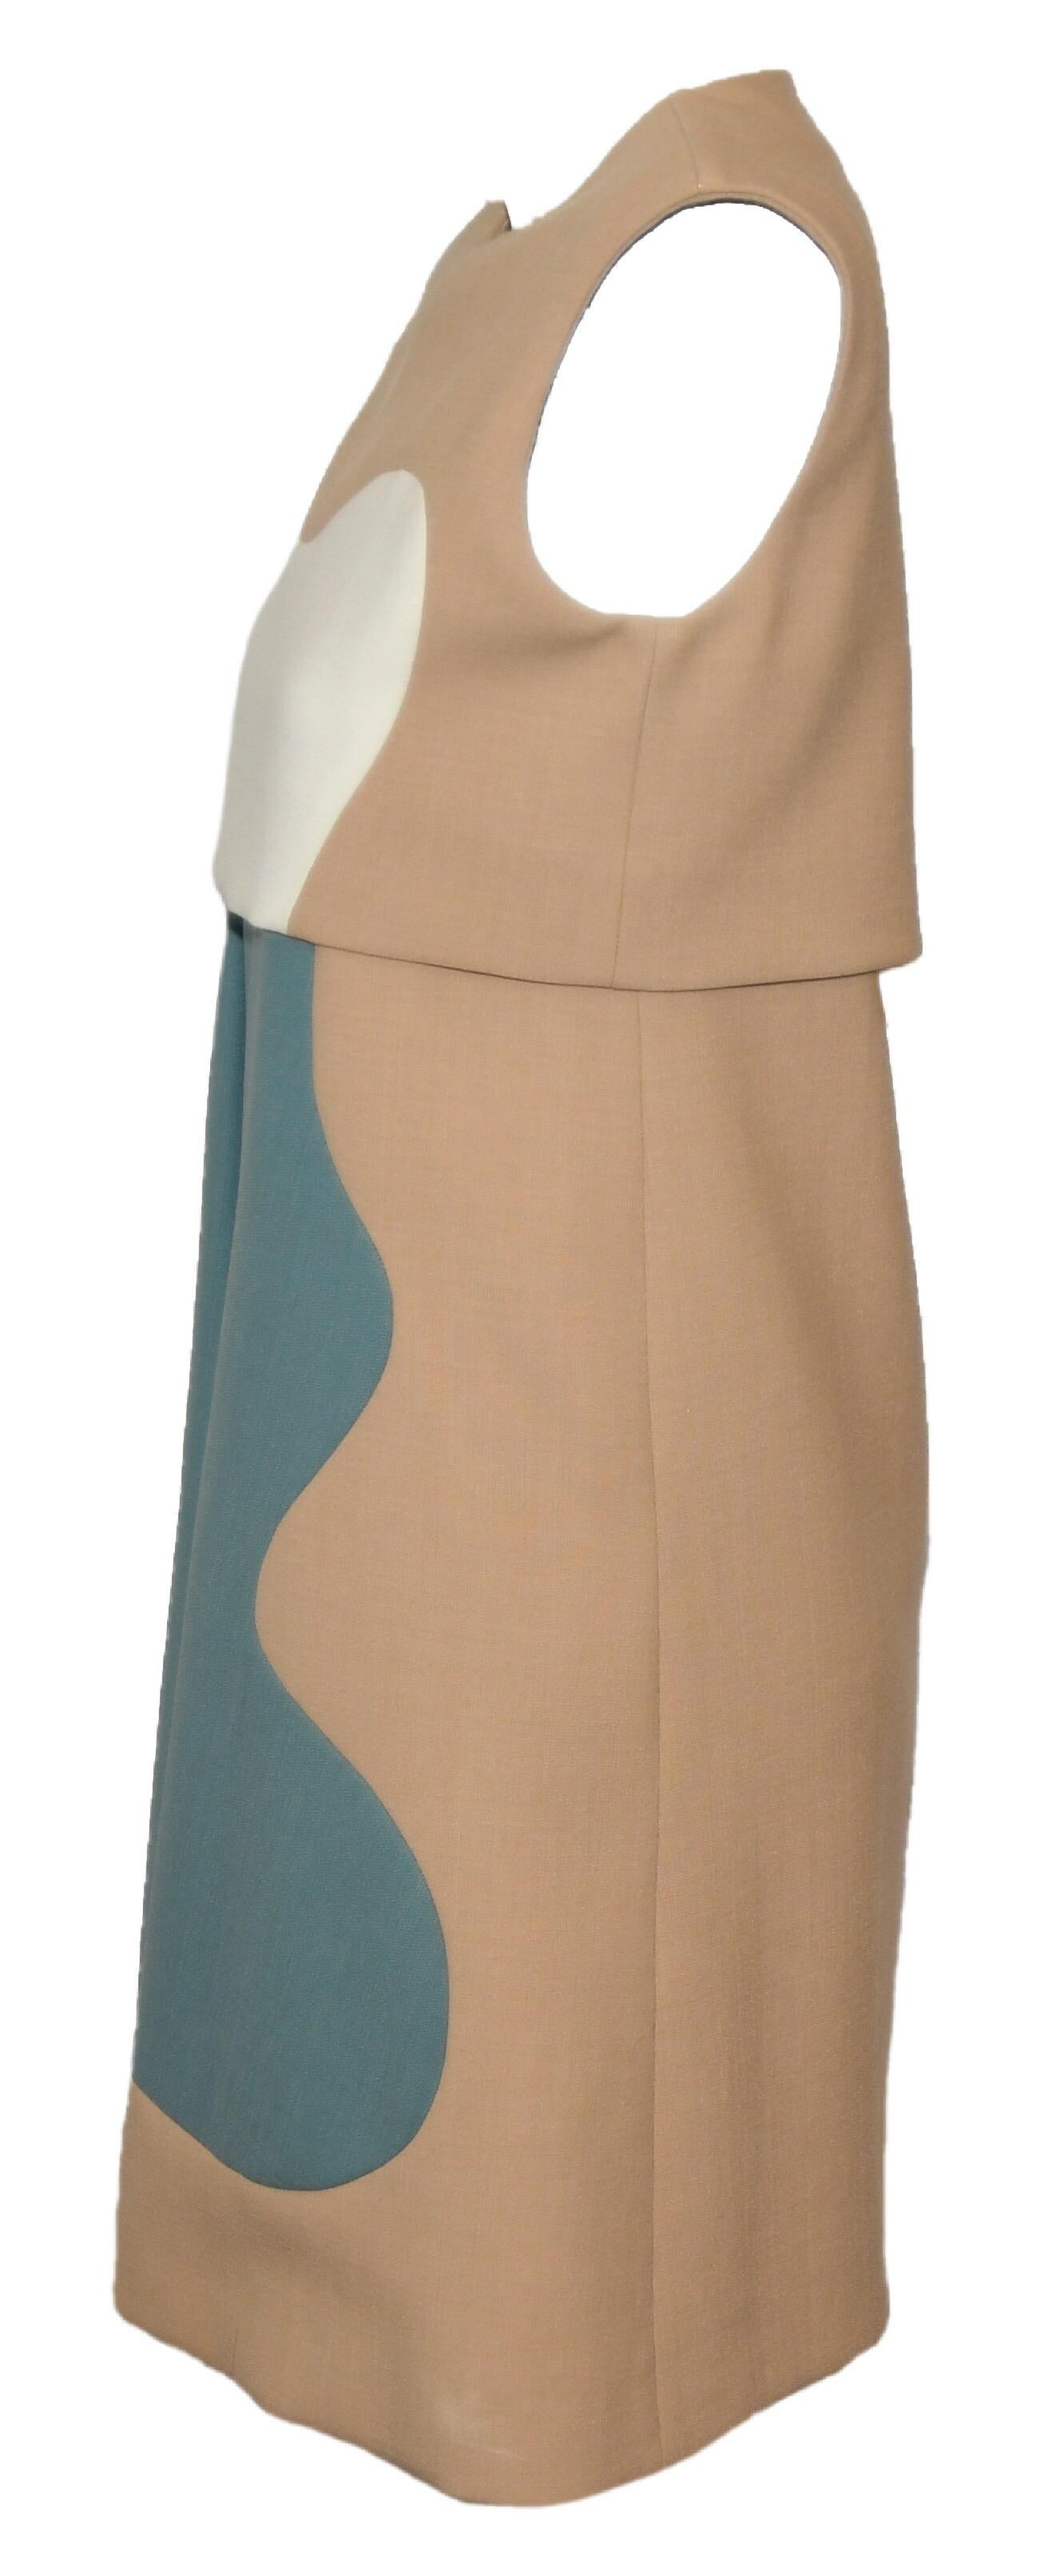 Chloe dress in the color block design includes distinctive structured color separations.  This round collar, sleeveless dress has a large pleat at front and wave like color blocking of the 3 different colors in white, sage and tan.  Dress is lined